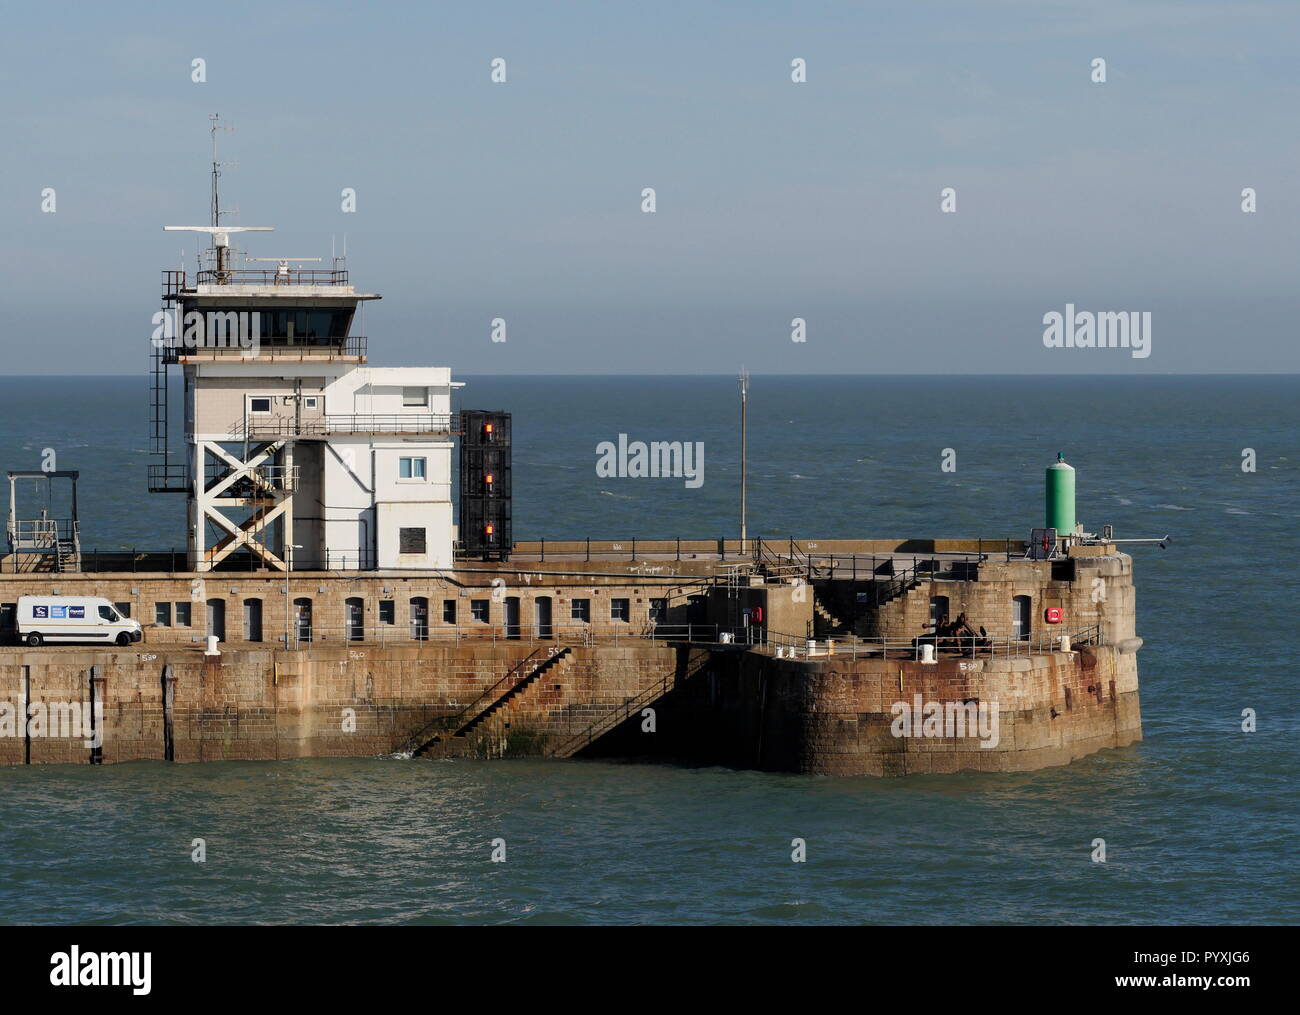 AJAXNETPHOTO. 2018. DOVER, ENGLAND. - PORT CONTROL - STARBOARD HAND BREAKWATER ENTRANCE TO THE HARBOUR.  PHOTO:JONATHAN EASTLAND/AJAX REF:GX8 180910 909 Stock Photo